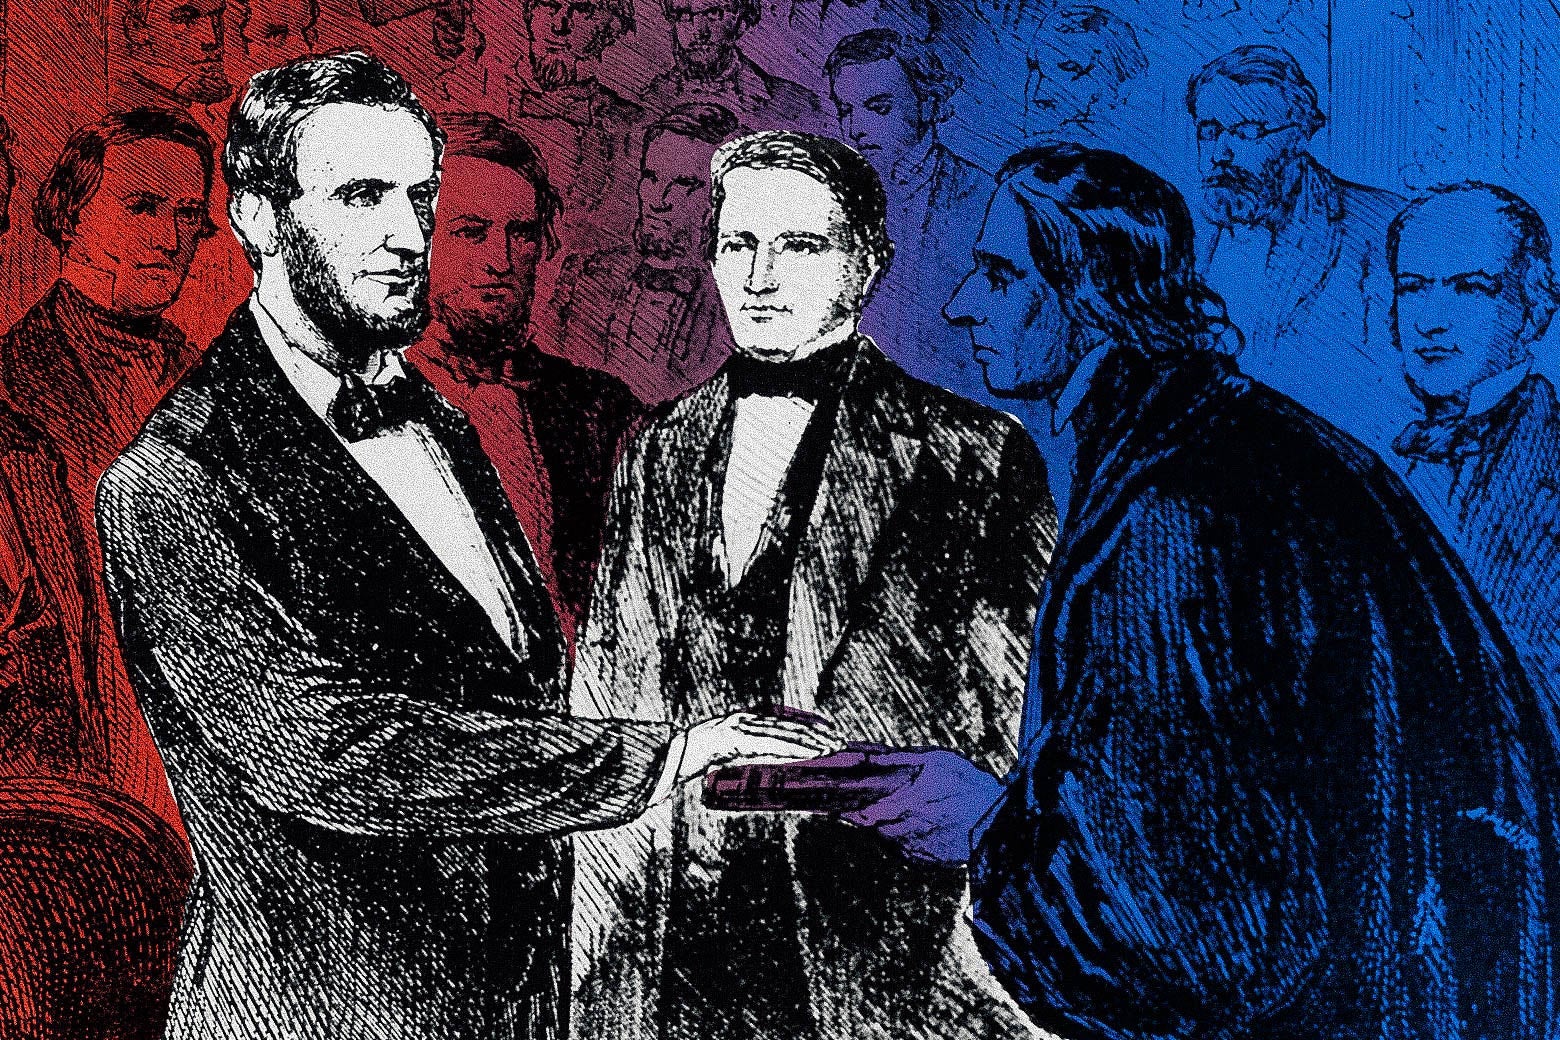 An illustration of Lincoln being sworn in on a Bible with James Buchanan standing next to him.